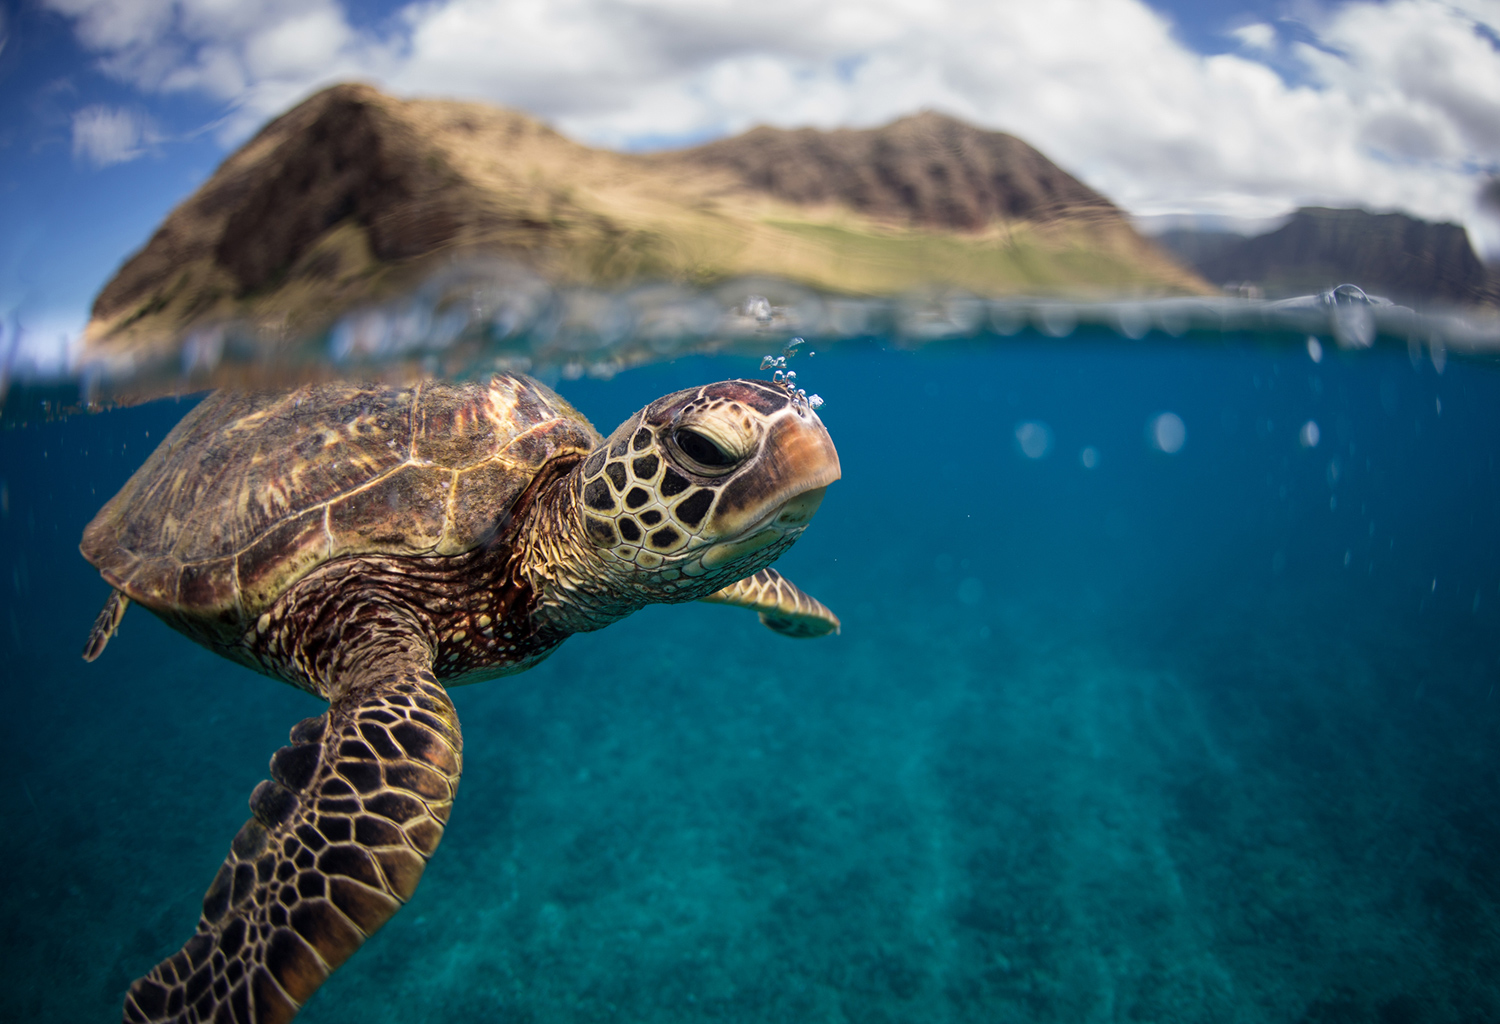 53 National Geographic Nature Photos to Inspire Happiness